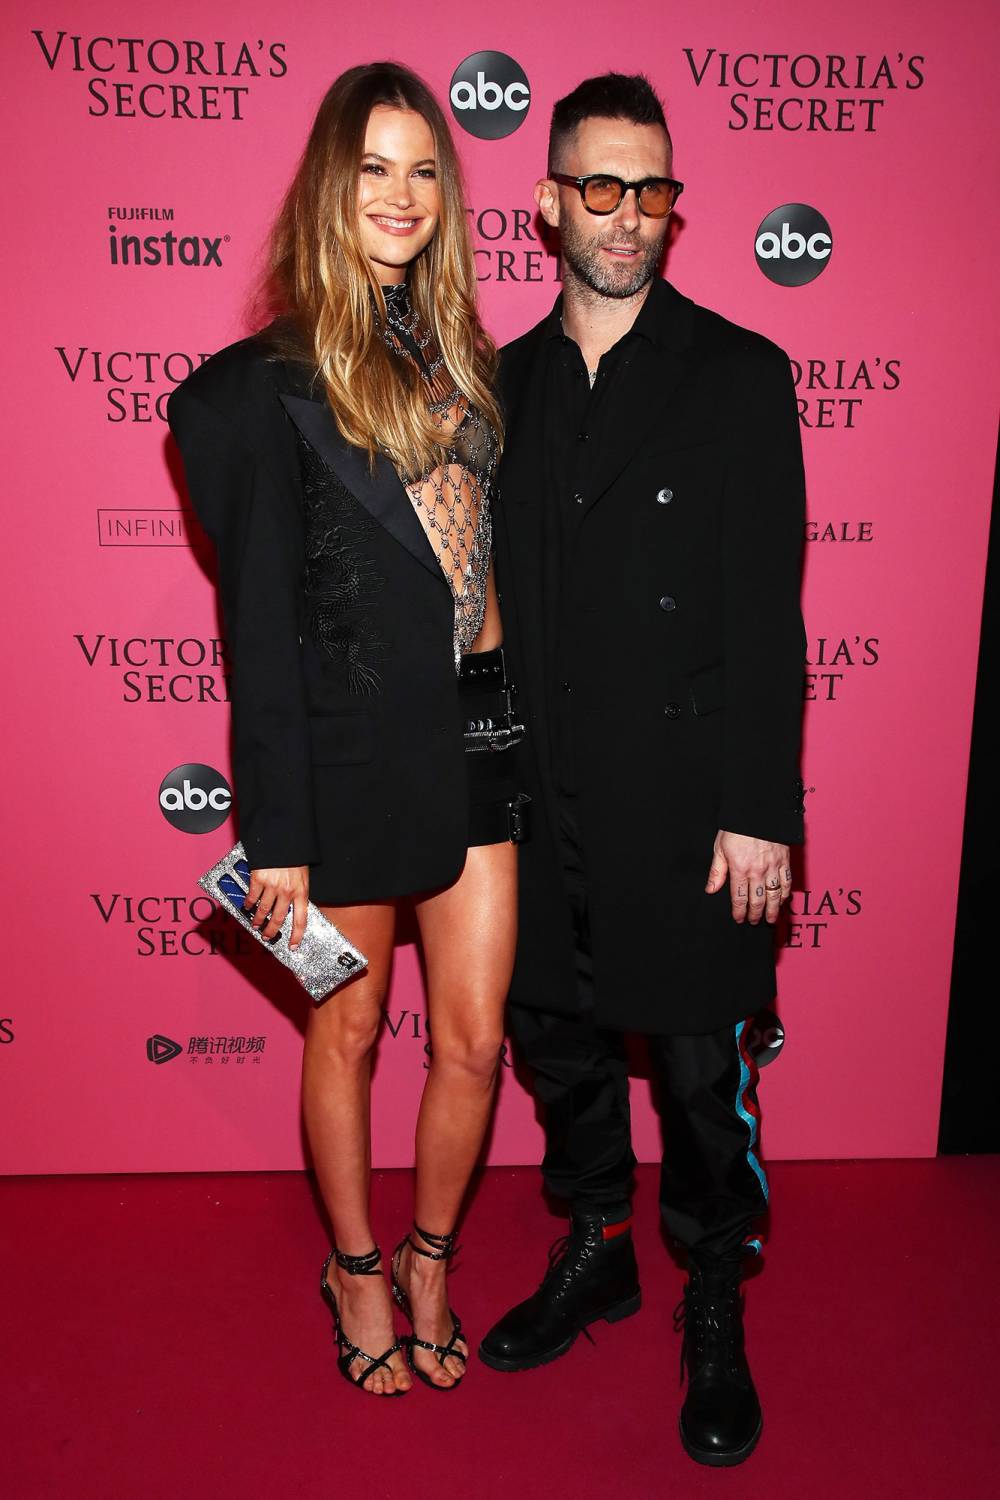 Behati Prinsloo Reveals She and Adam Levine Swap Clothes Plus, More of Her Fashion and Beauty Secrets